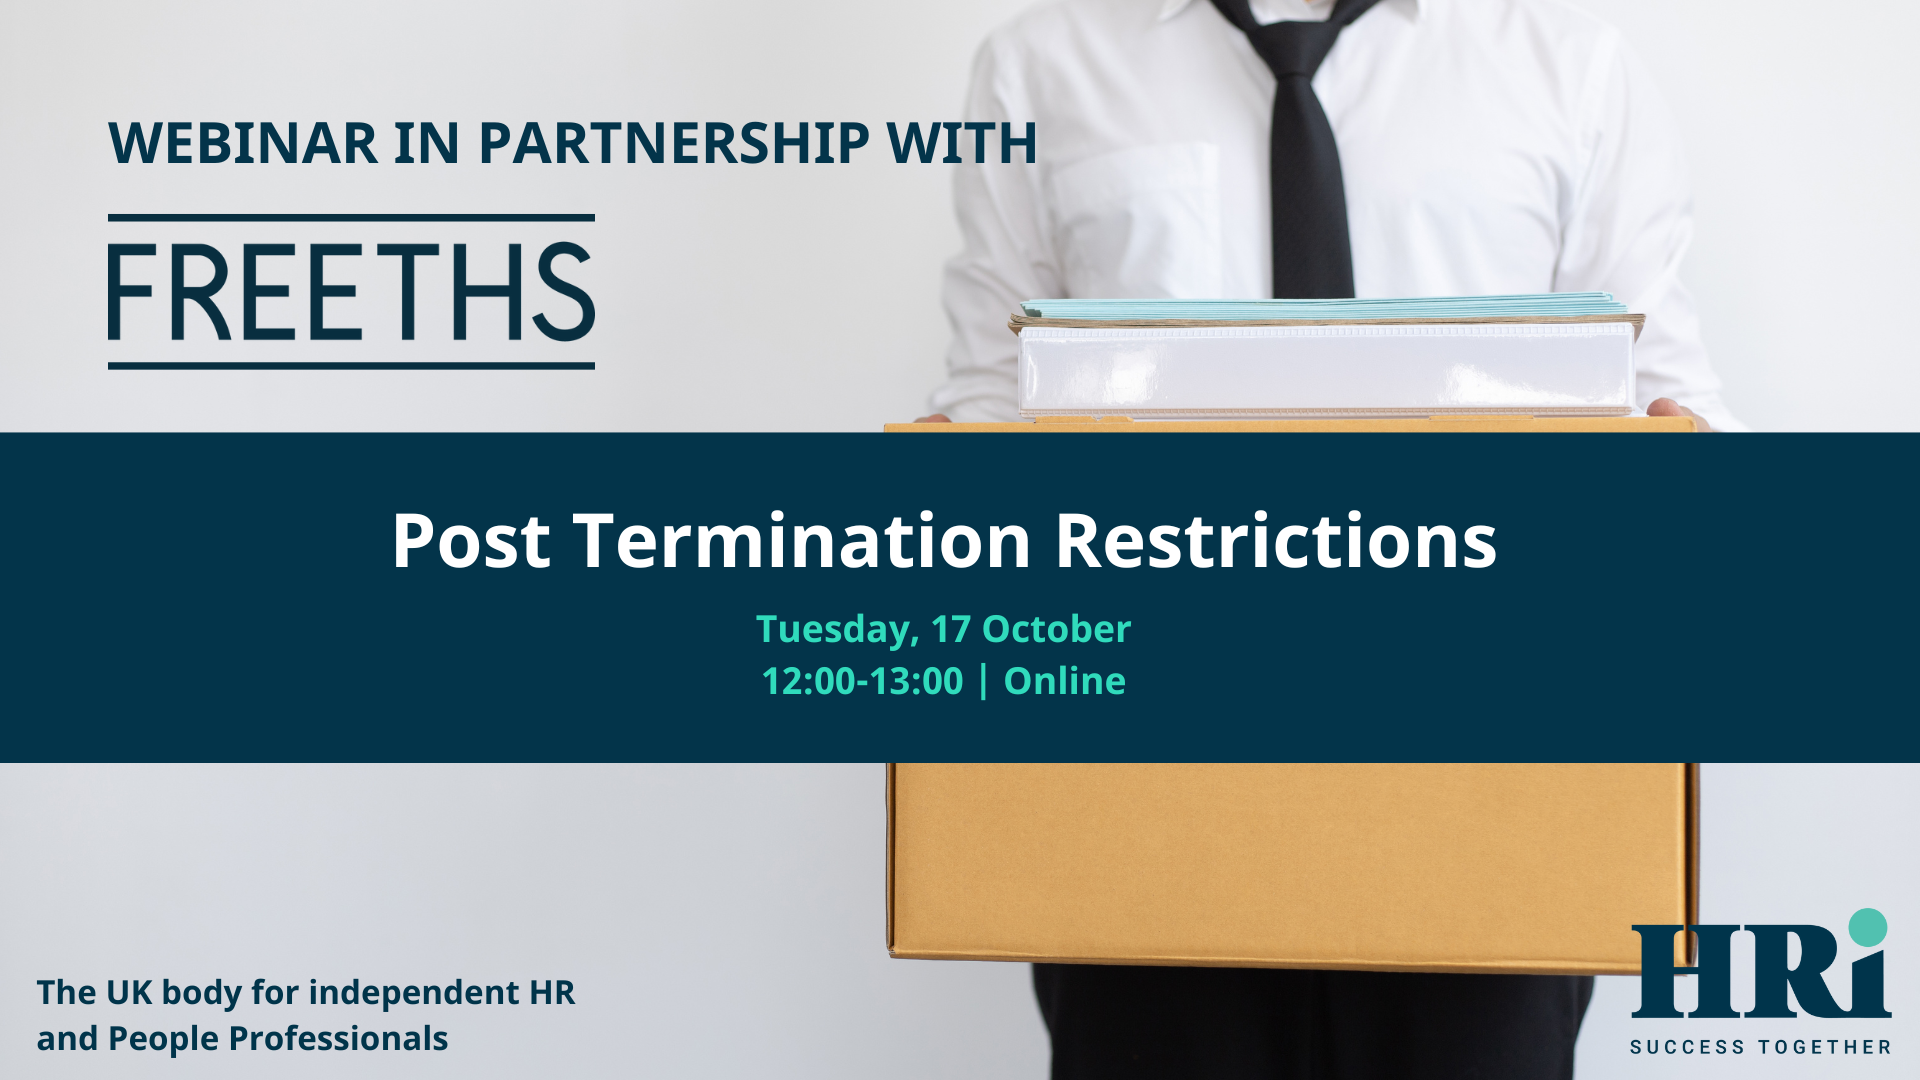 Freeths Post Termination Restrictions